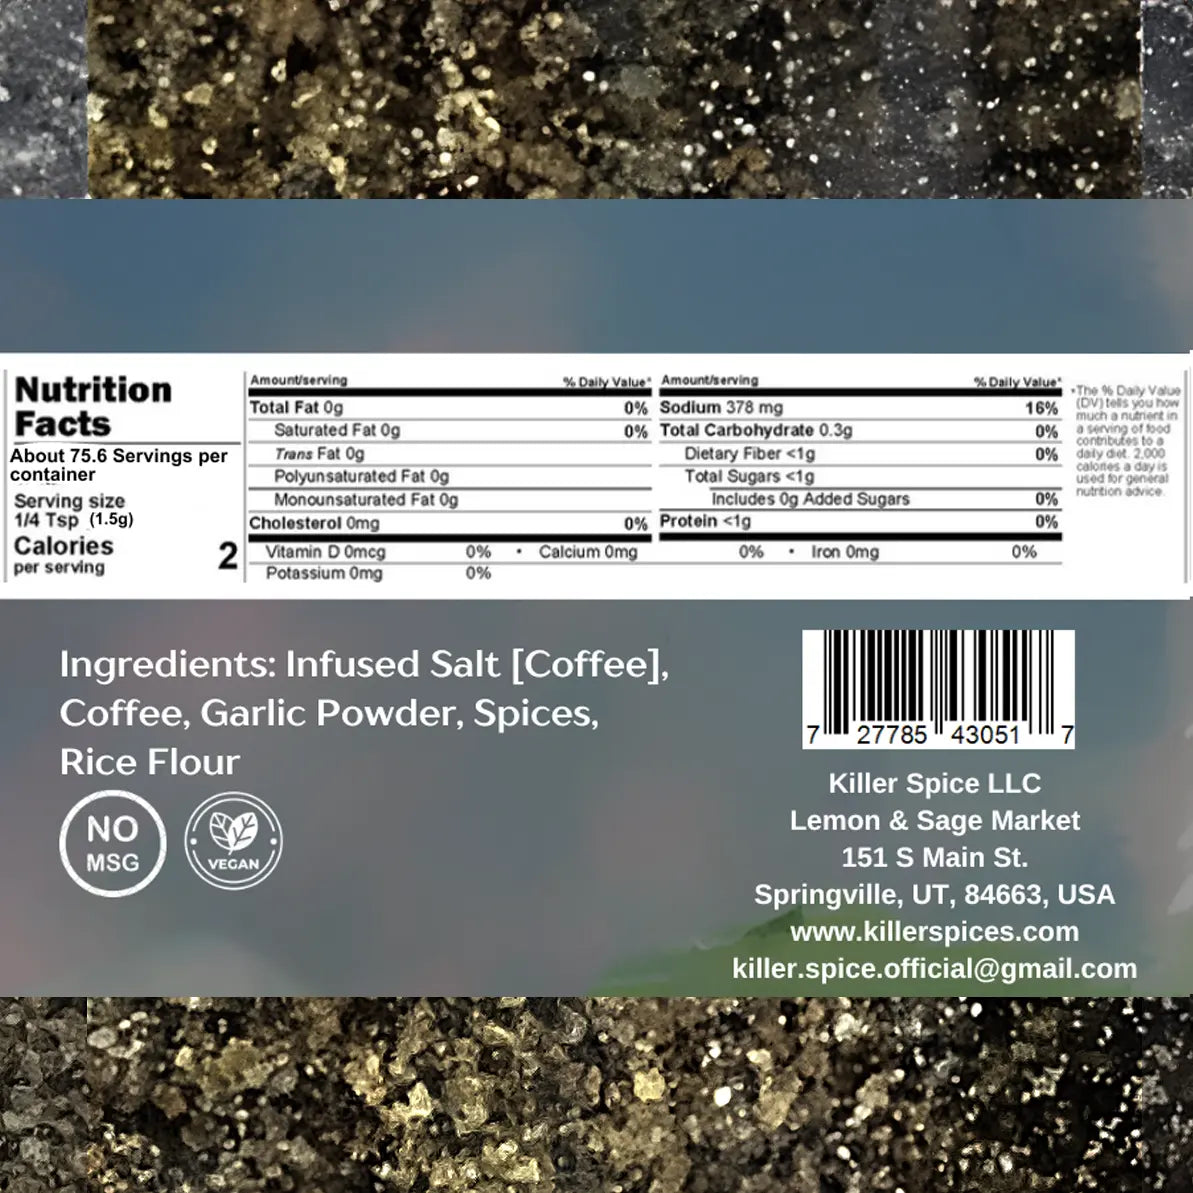 A label showing the ingredients of a Killer Beef (Infused Coffee, Garlic Rub) product by Killer Spice.